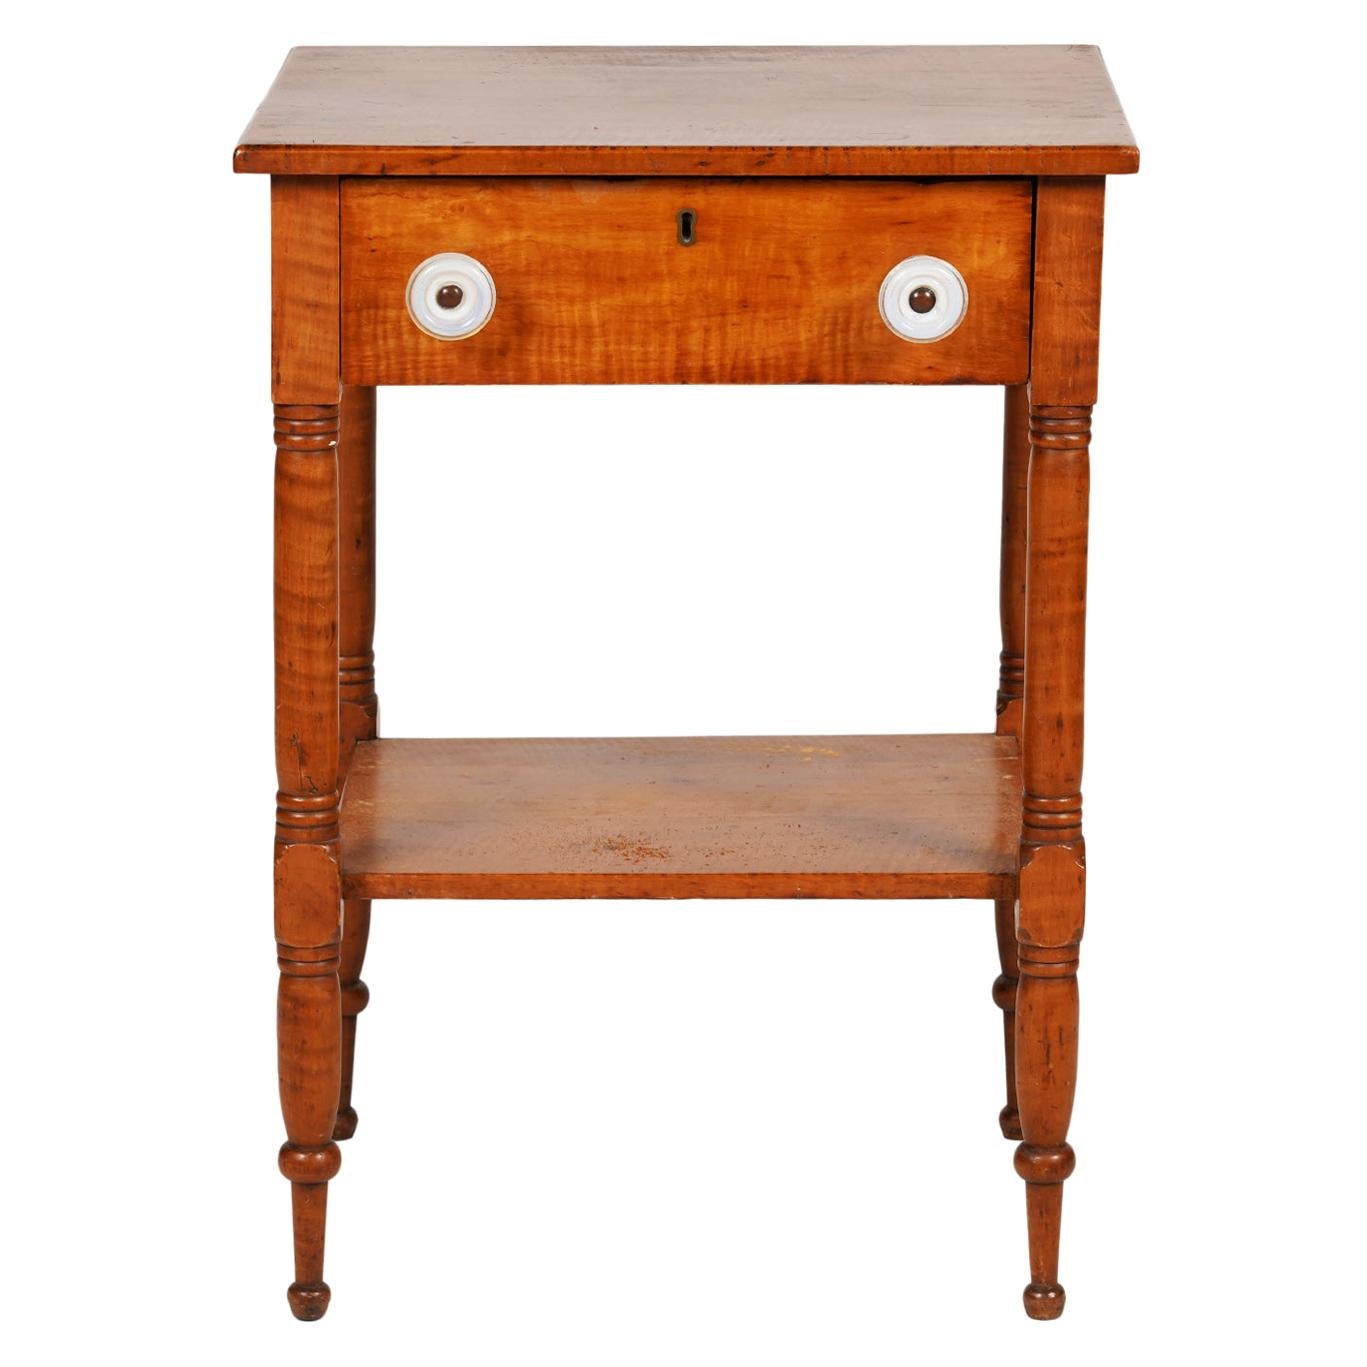 Early American Federal Tiger Maple One-Drawer Work Table or Stand, circa 1830